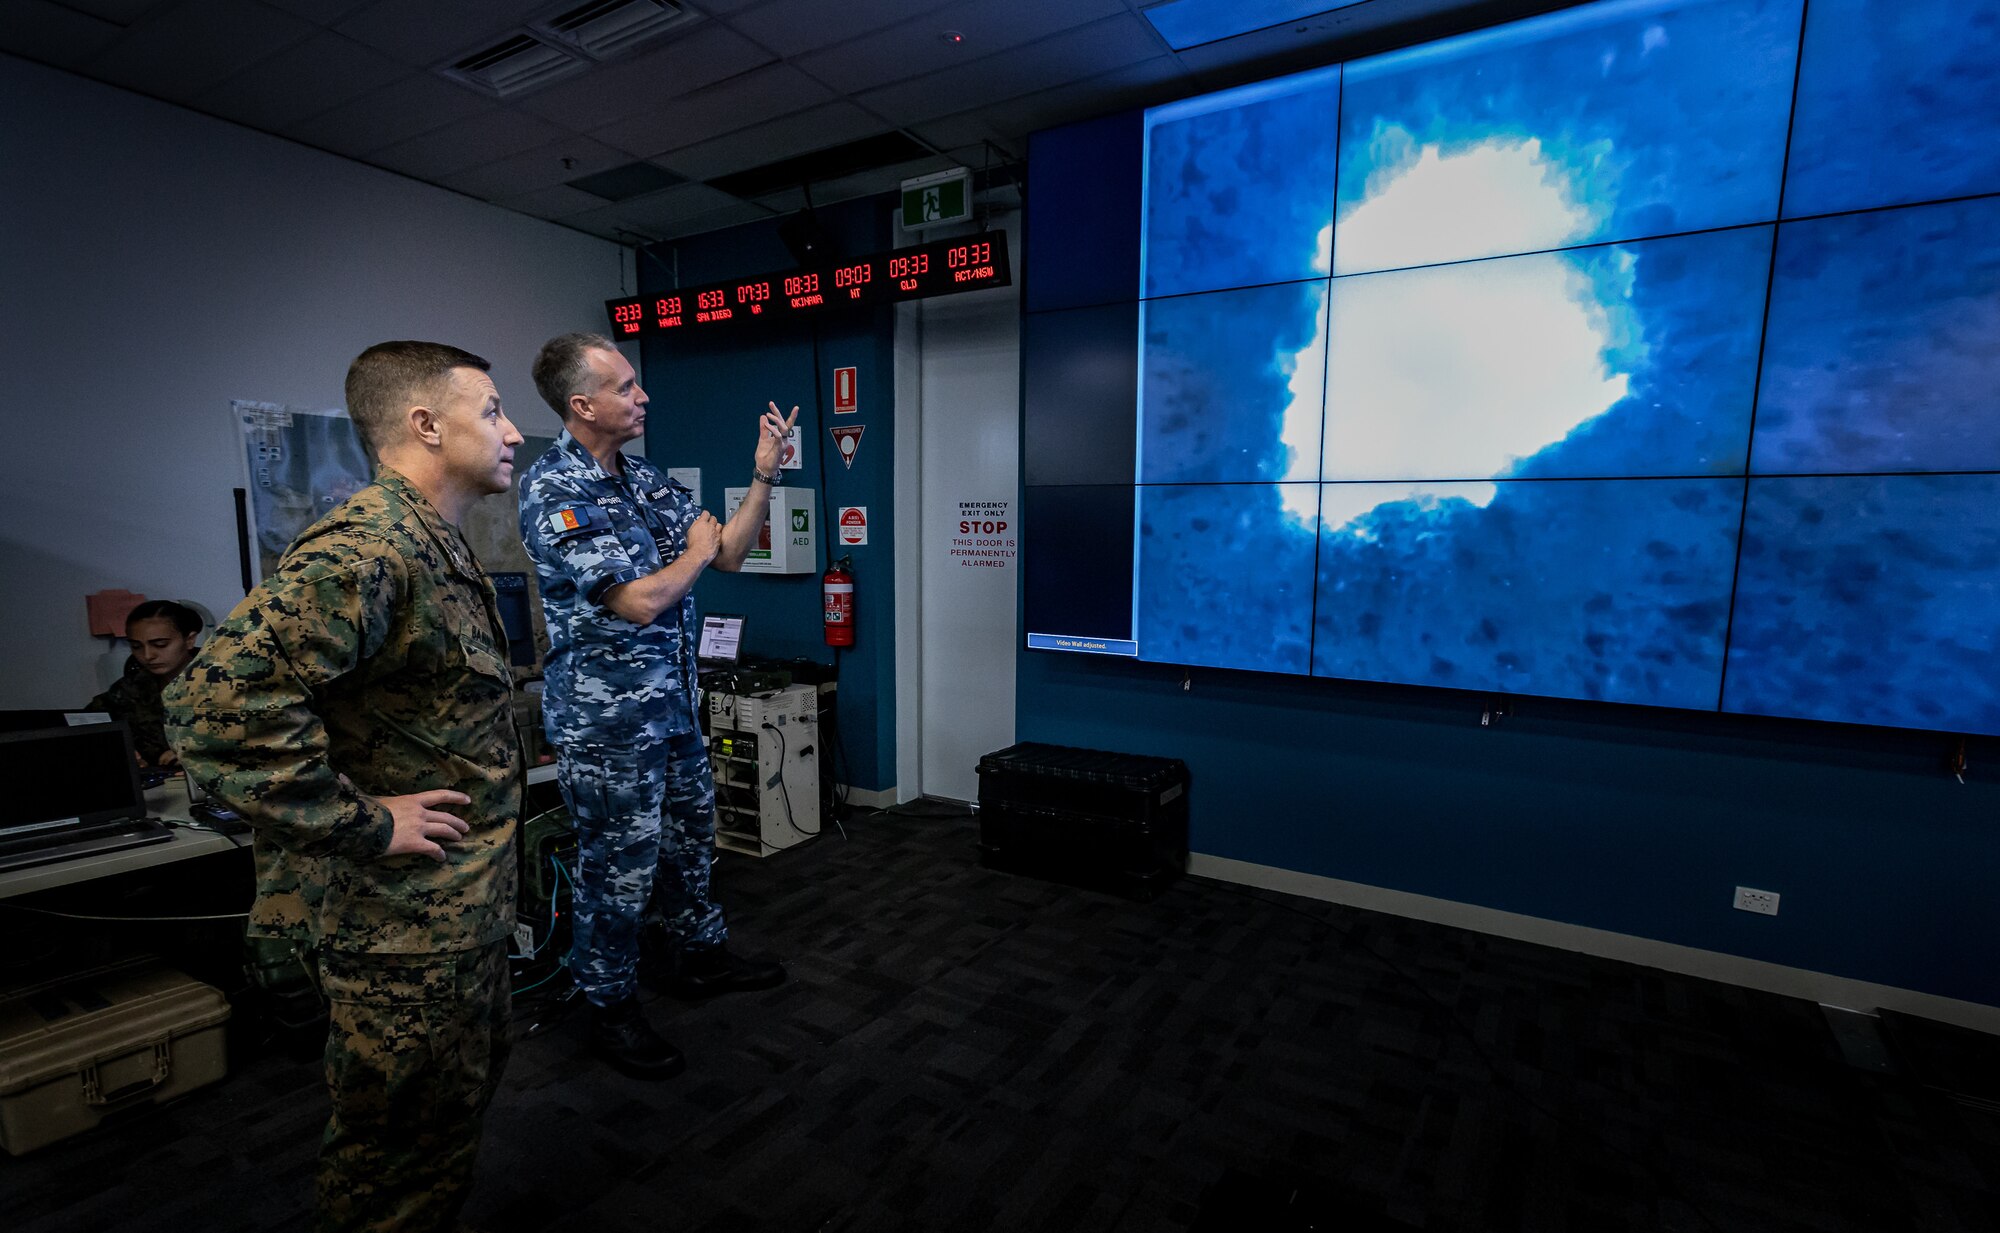 U.S. Marine Corps Col. David M. Banning and Royal Australian Air Force Group Capt. Stewart Dowrie assess footage from a RQ-21A Blackjack taken Aug. 14, 2020, of a B-1B Lancer airstrike. Banning is the commanding officer of Marine Rotational Force – Darwin and Dowrie is the commander of Australian Headquarters Northern Command. The footage was part of a month-long exercise integrating Marine Corps, Australian and U.S. Air Force assets for rapid long distance airstrikes. (U.S. Marine Corps Photo by Gunnery Sgt. Scott M. Schmidt)